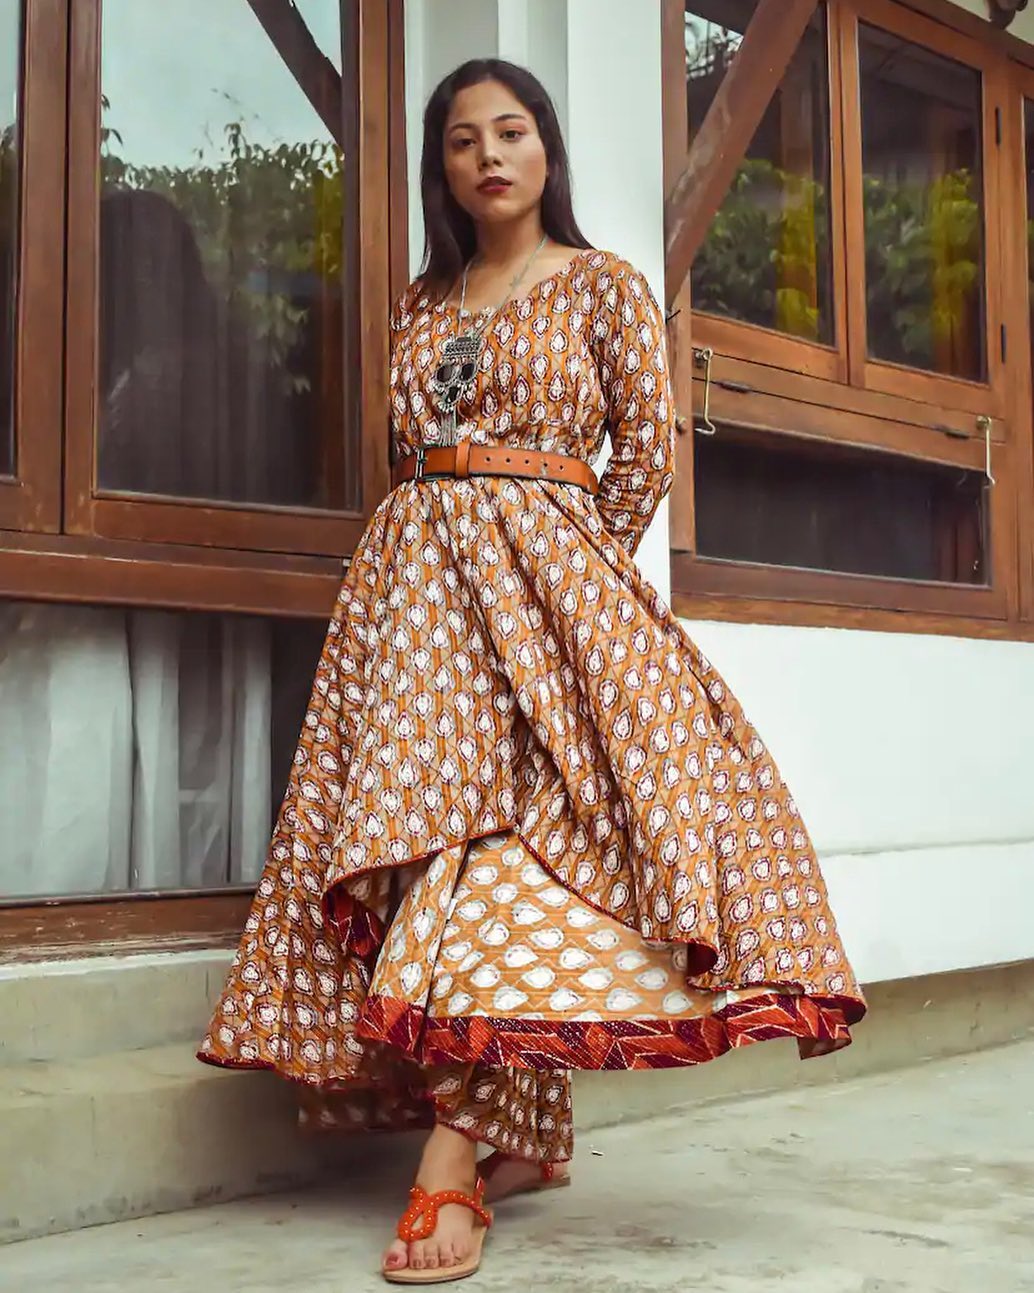 MYNTRA - Who said ethnic wear cant be fun?! 💥
📸 @bearhugsmunchkin_neha 
Look up similar product code:  8349423
For more on-point looks, styling hacks and fashion advice, tune in to the binge-worthy fa...